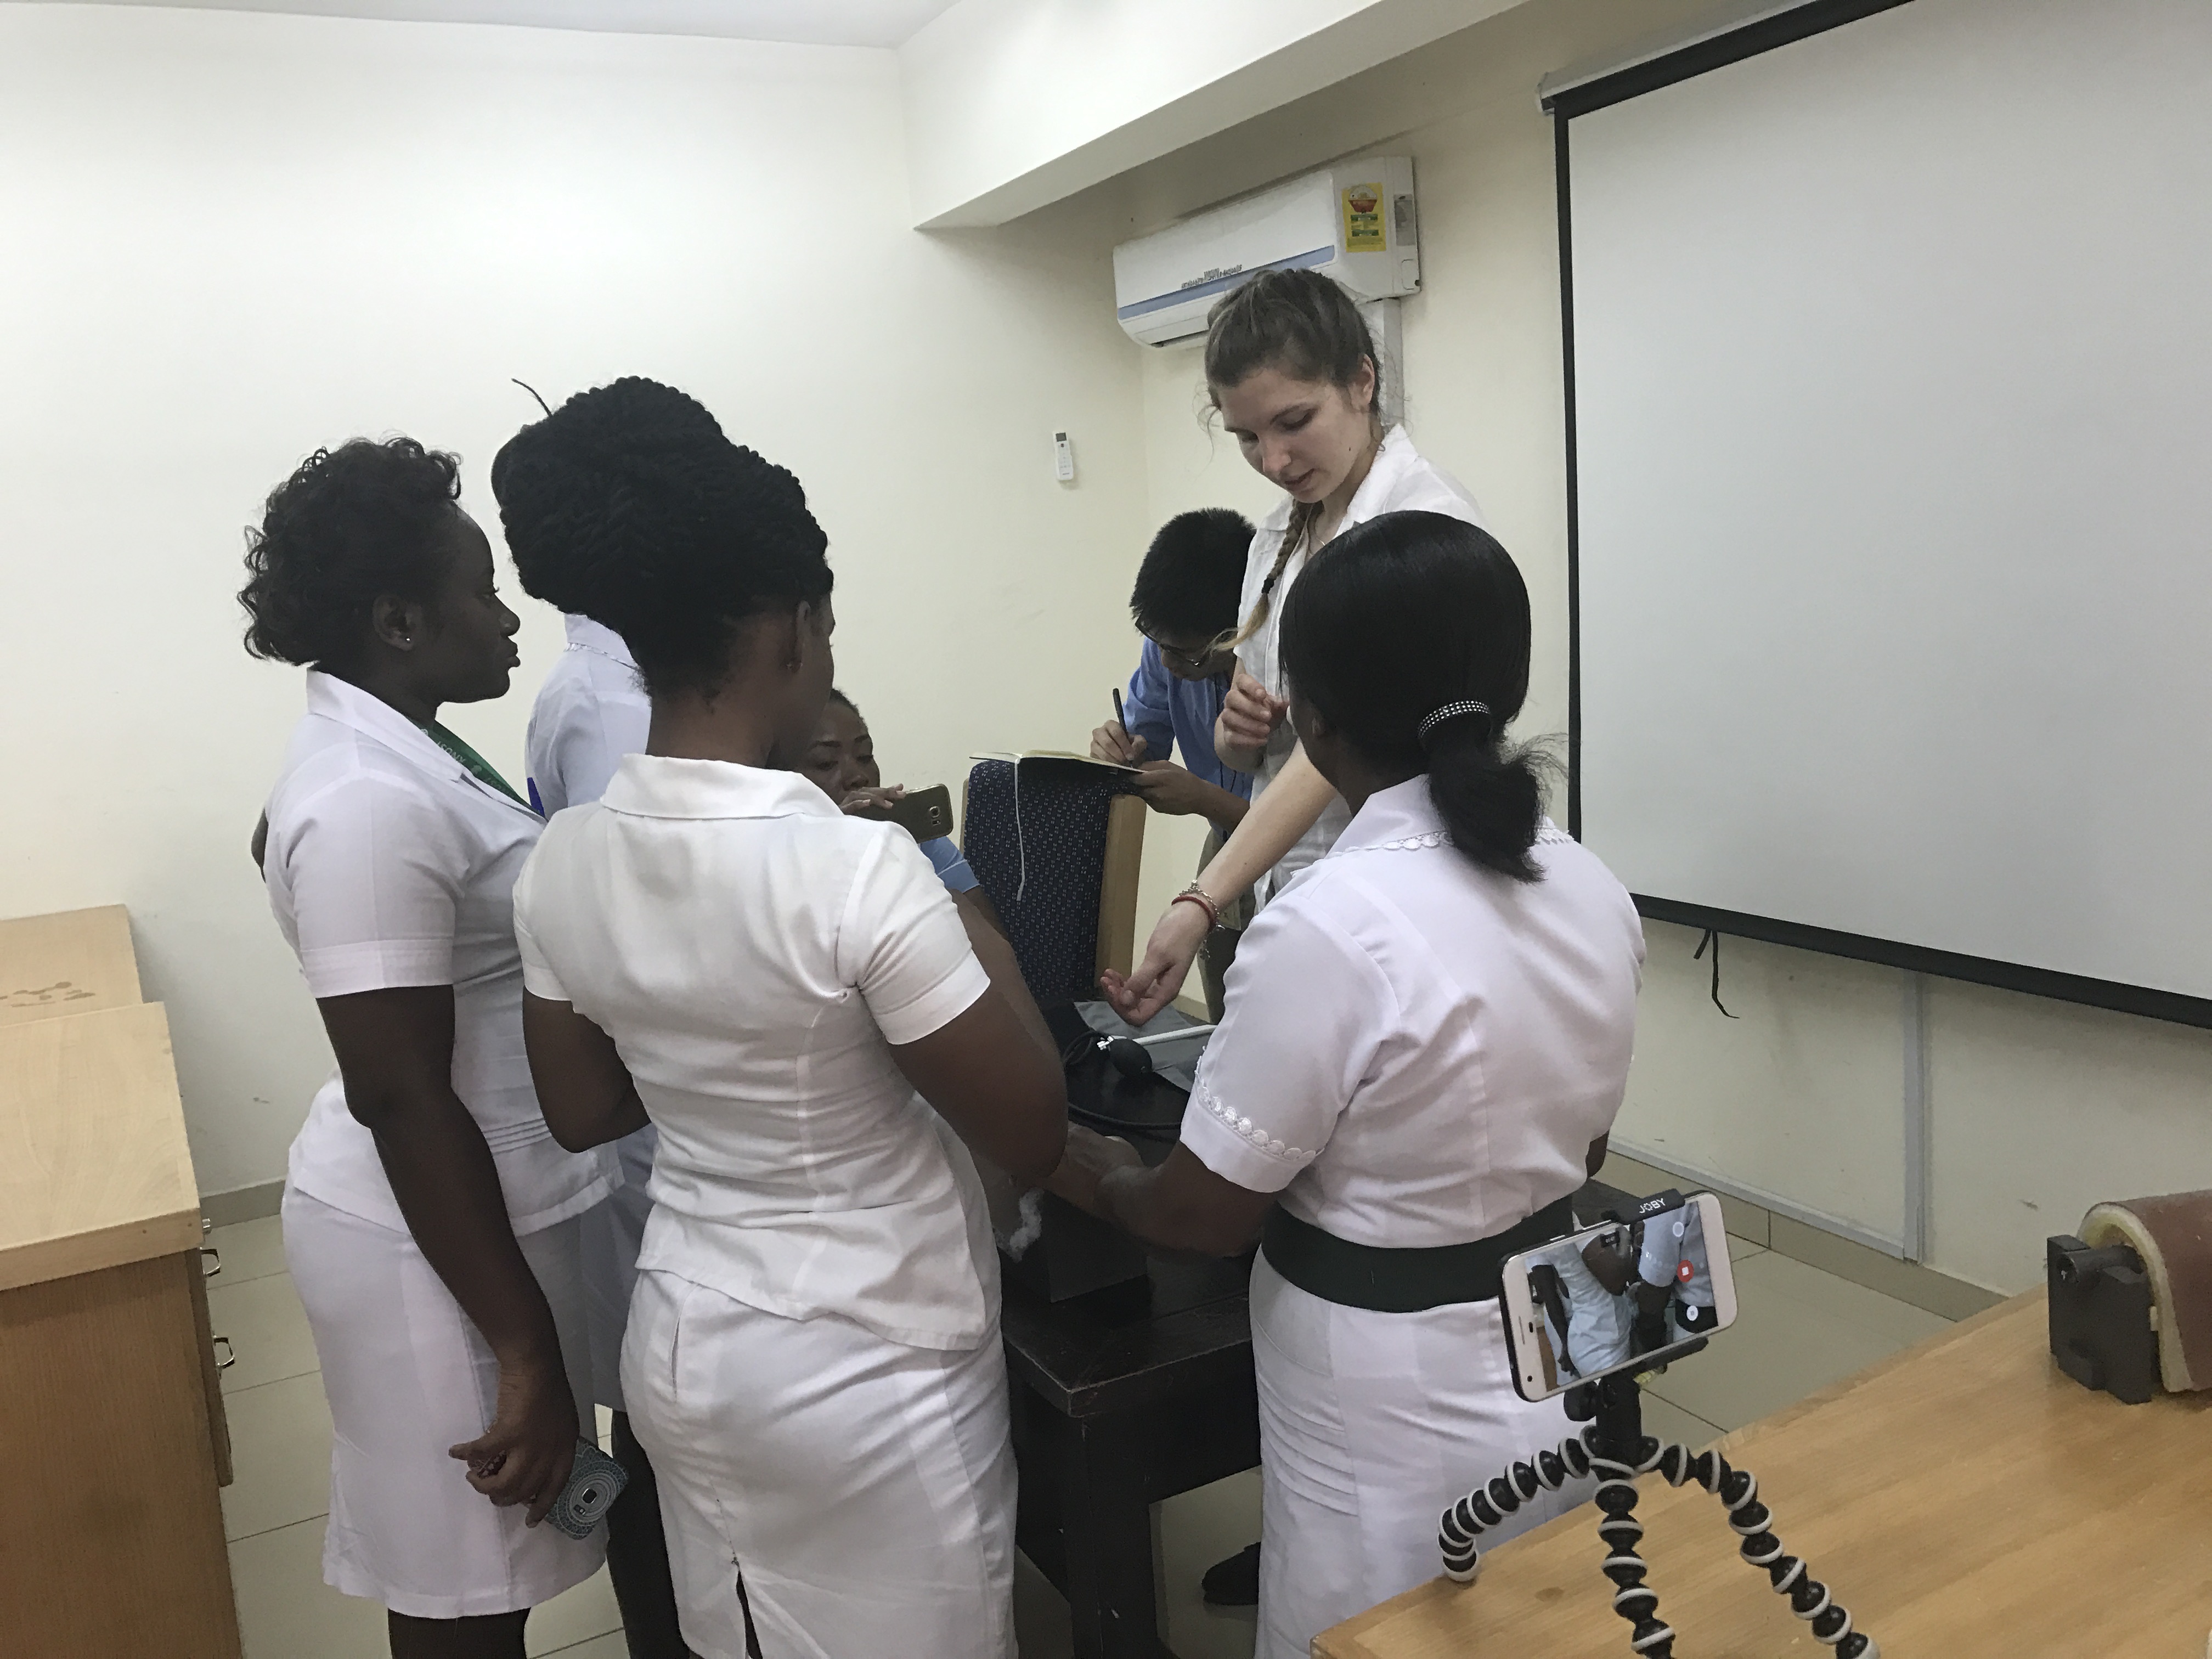 ME 599 – Design for Global Health: Medical device usability testing and iterative design